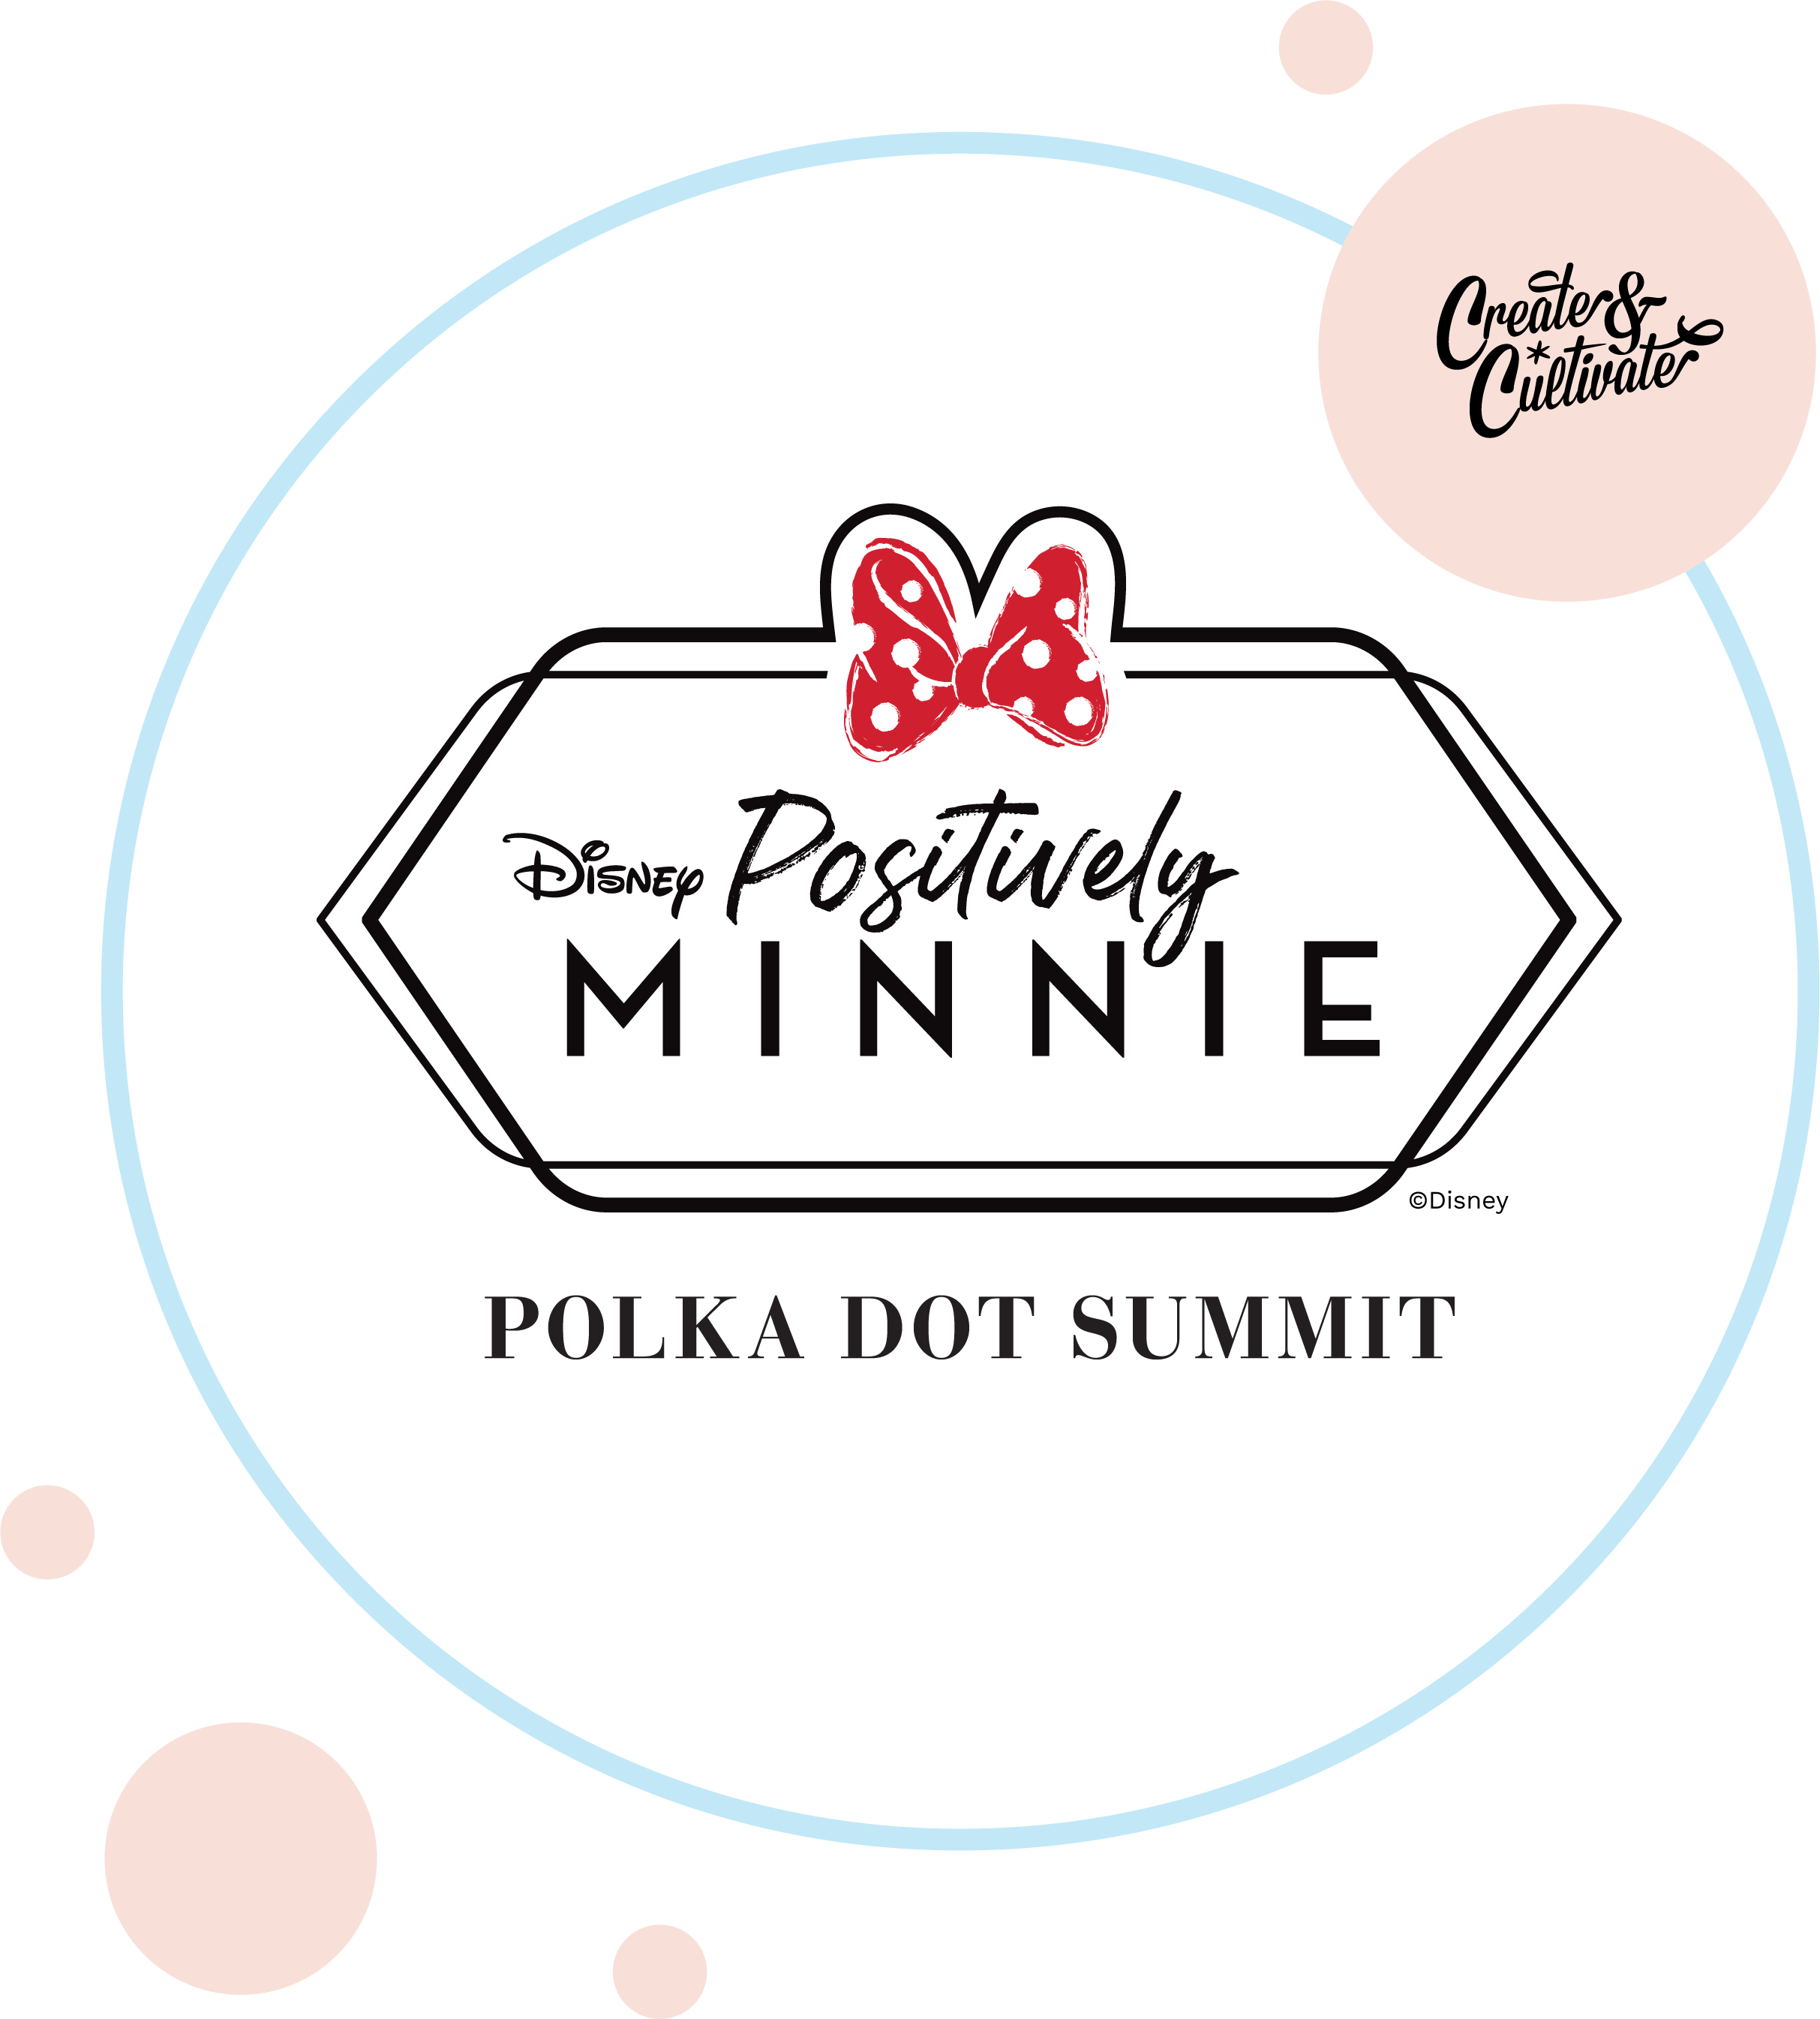 Disney and Create & Cultivate Launch the Minnie Mouse inspired Polka Dot Summit